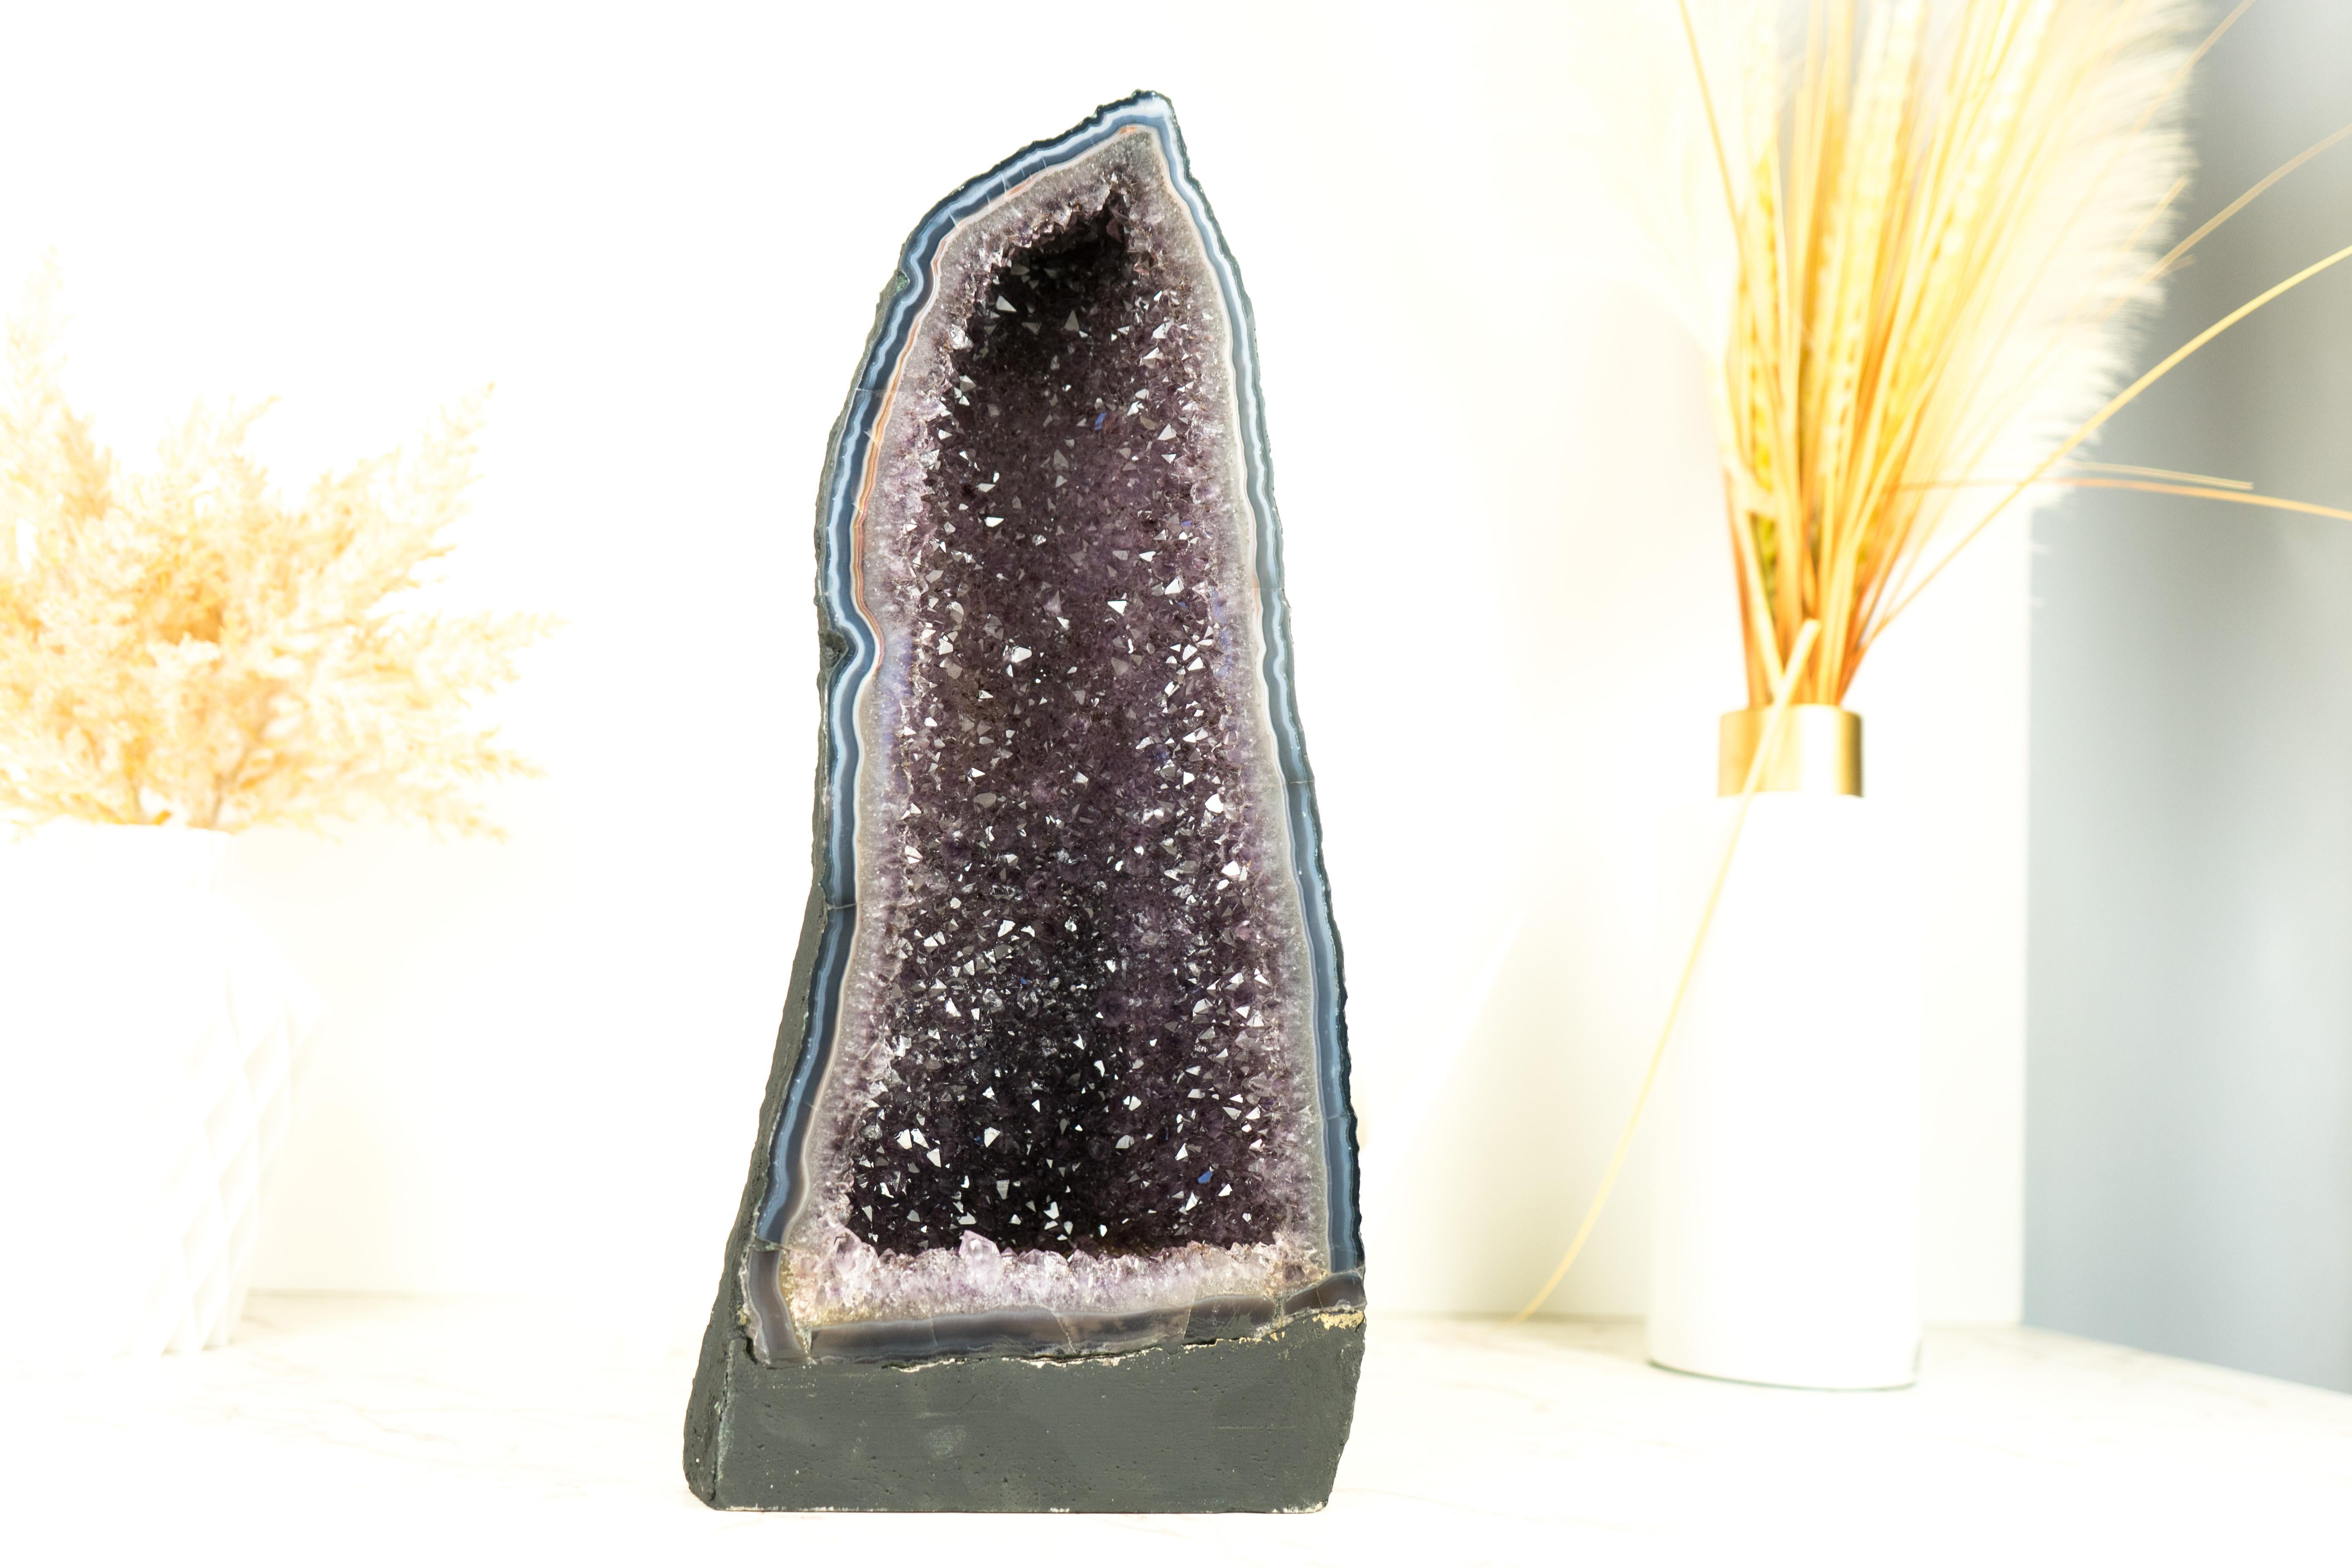 An Agate Geode that will elevate your space with its sparkly Lavender Amethyst Druzy and rare lace agate formation, this geode brings beauty and sophistication to any home or office decor, be it a table, shelf, or a special space.

The first thing